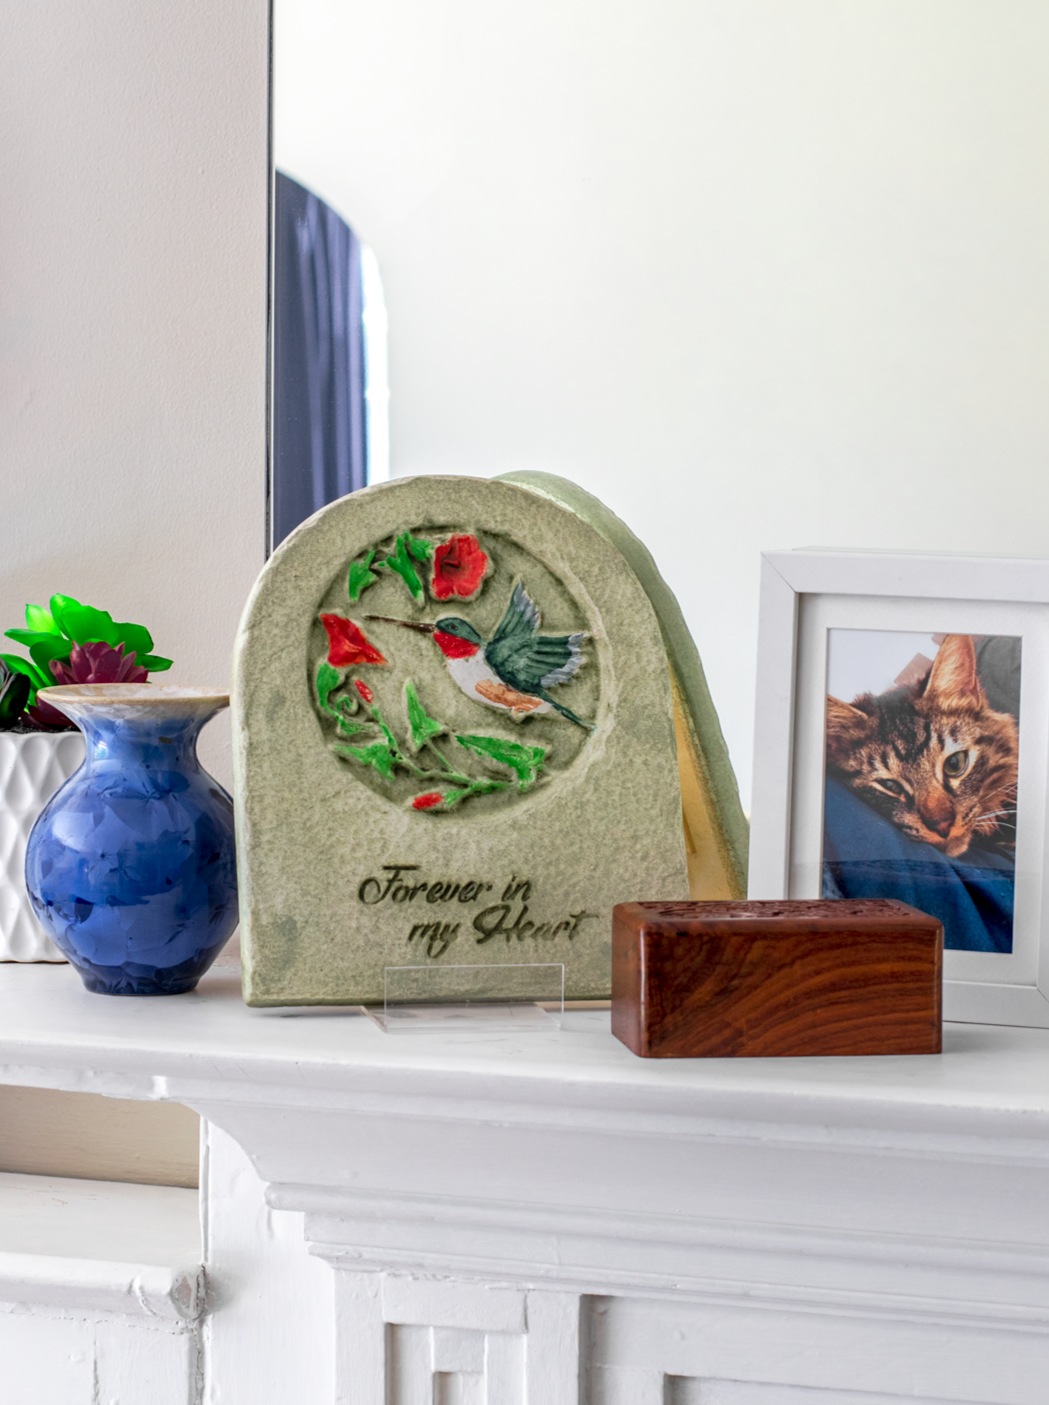 Ceramic hand painted plaque on a mantel with hummingbird and flower design for memorial